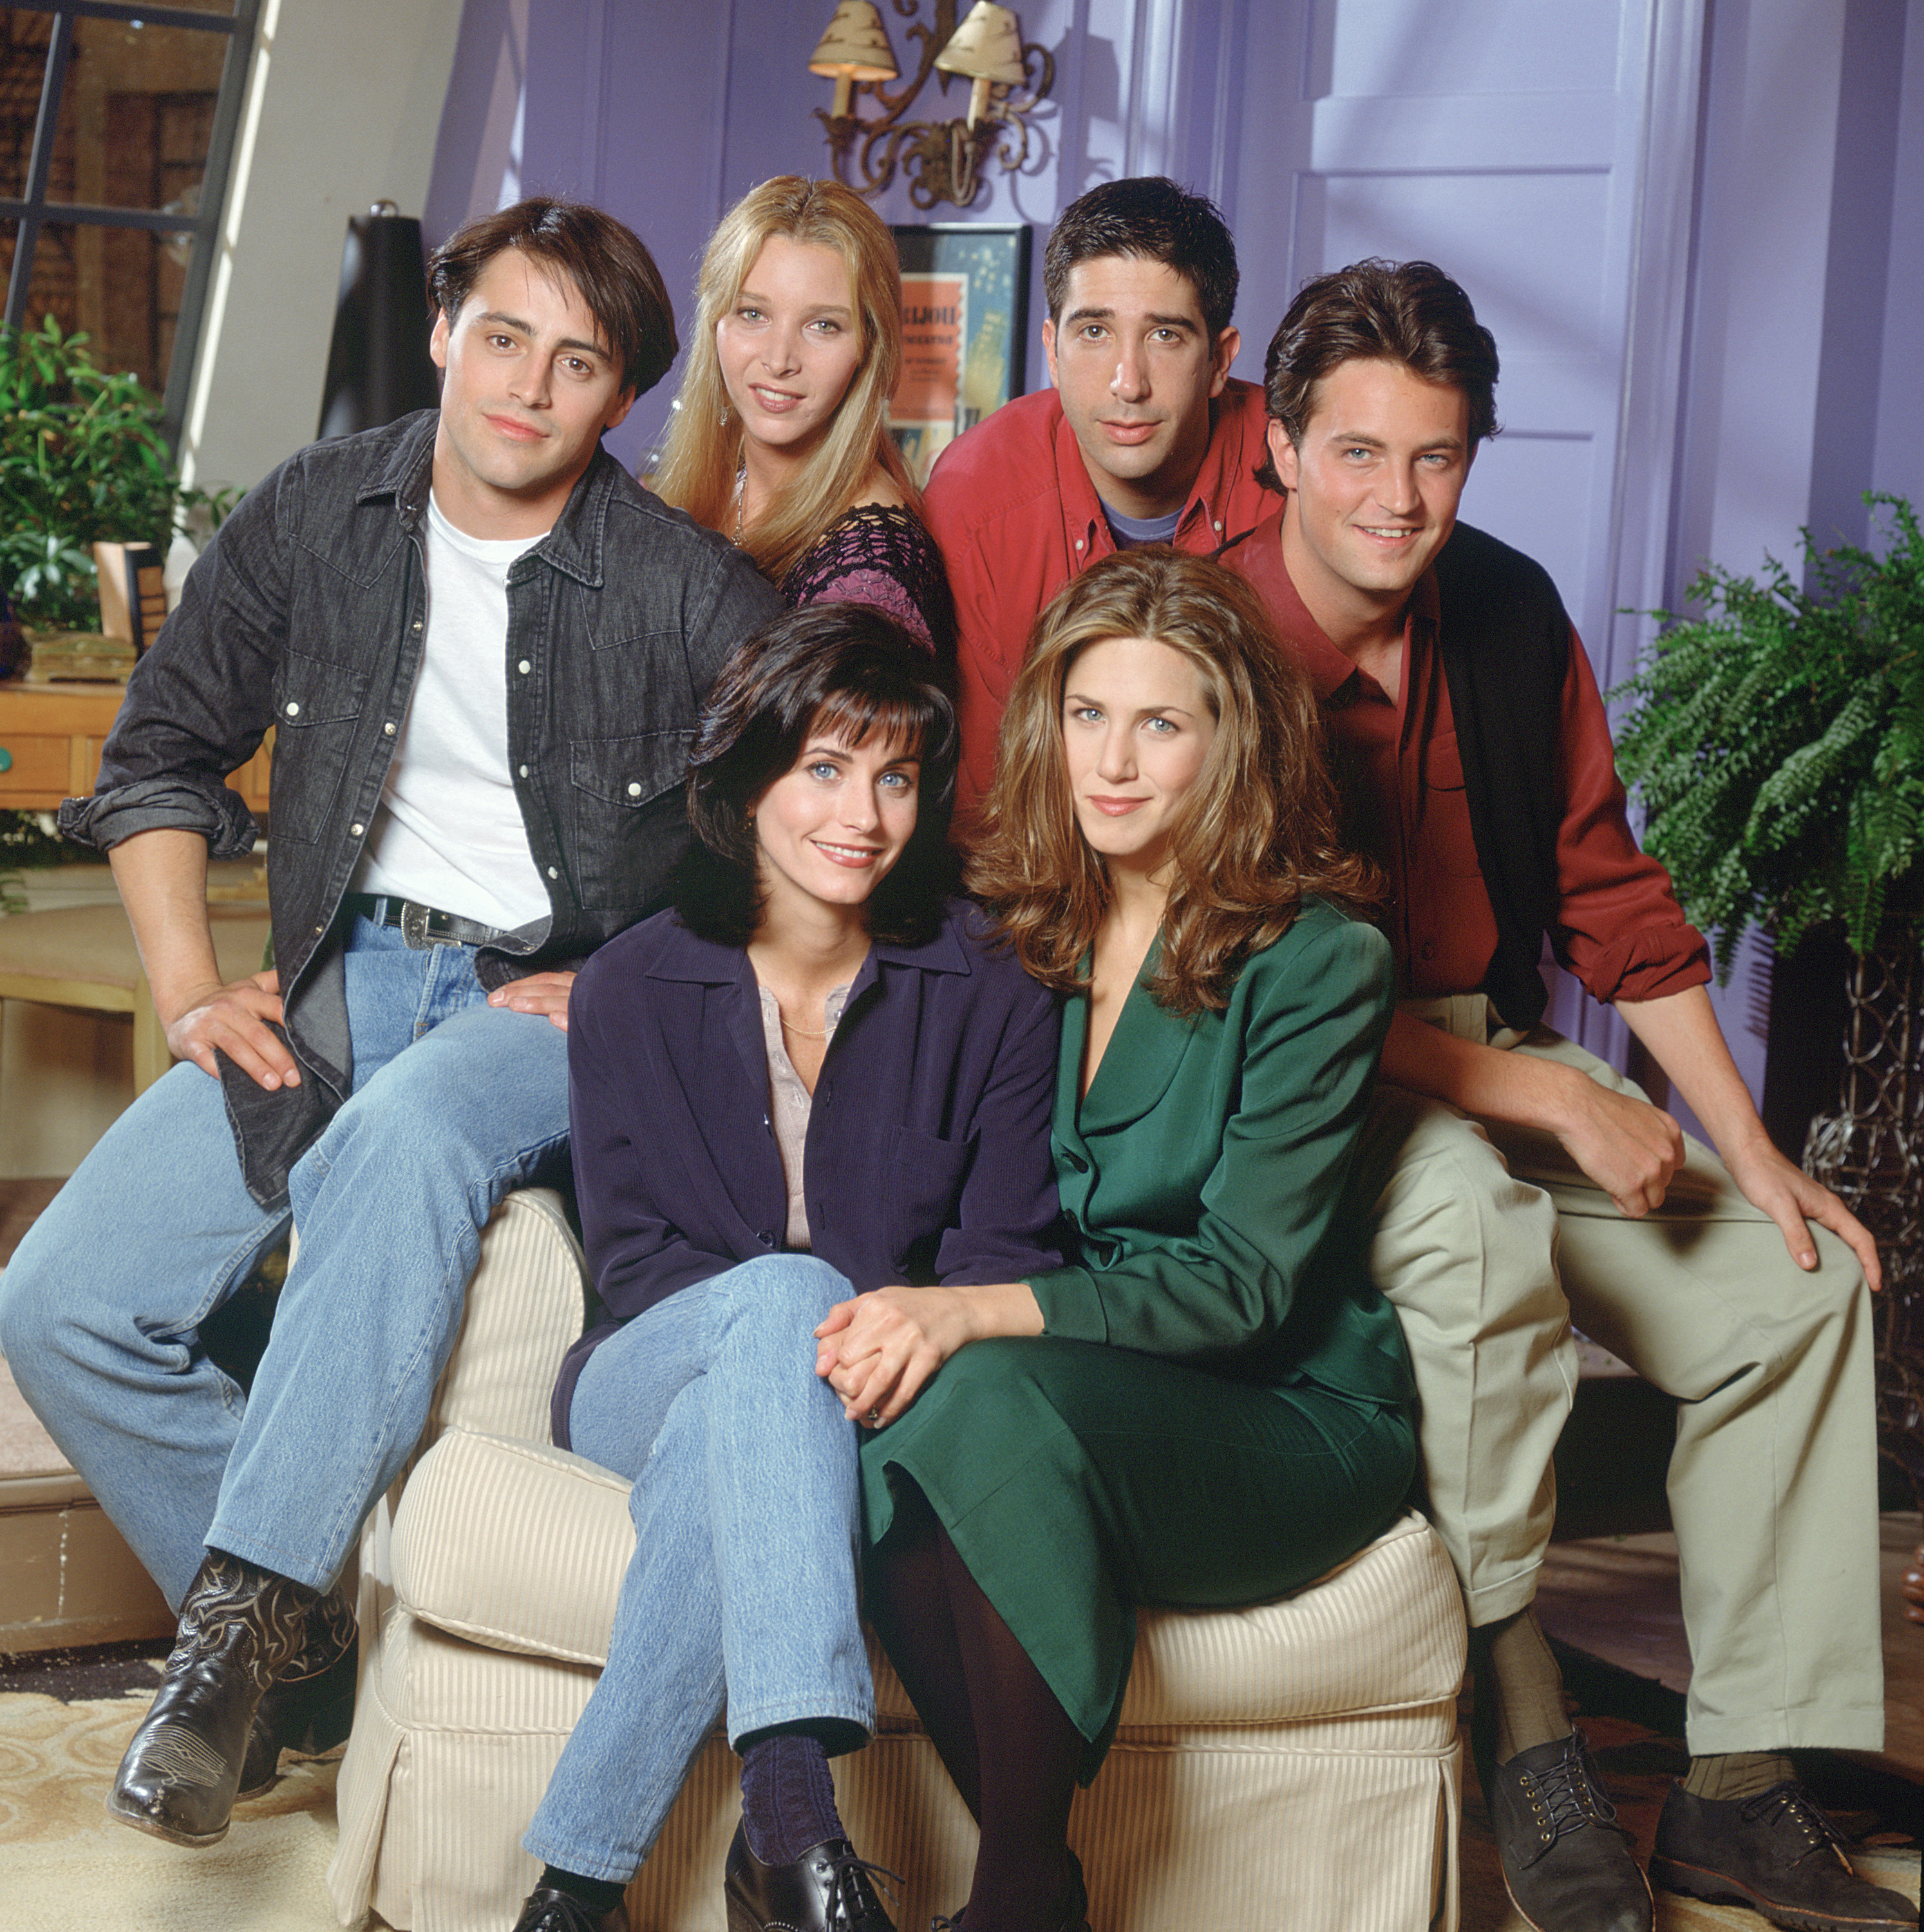 Courteney Cox, Matt LeBlanc, Lisa Kudrow, David Schwimmer, Matthew Perry, and Jennifer Aniston posing as their characters from "Friends" on June 15, 1994 | Source: Getty Images